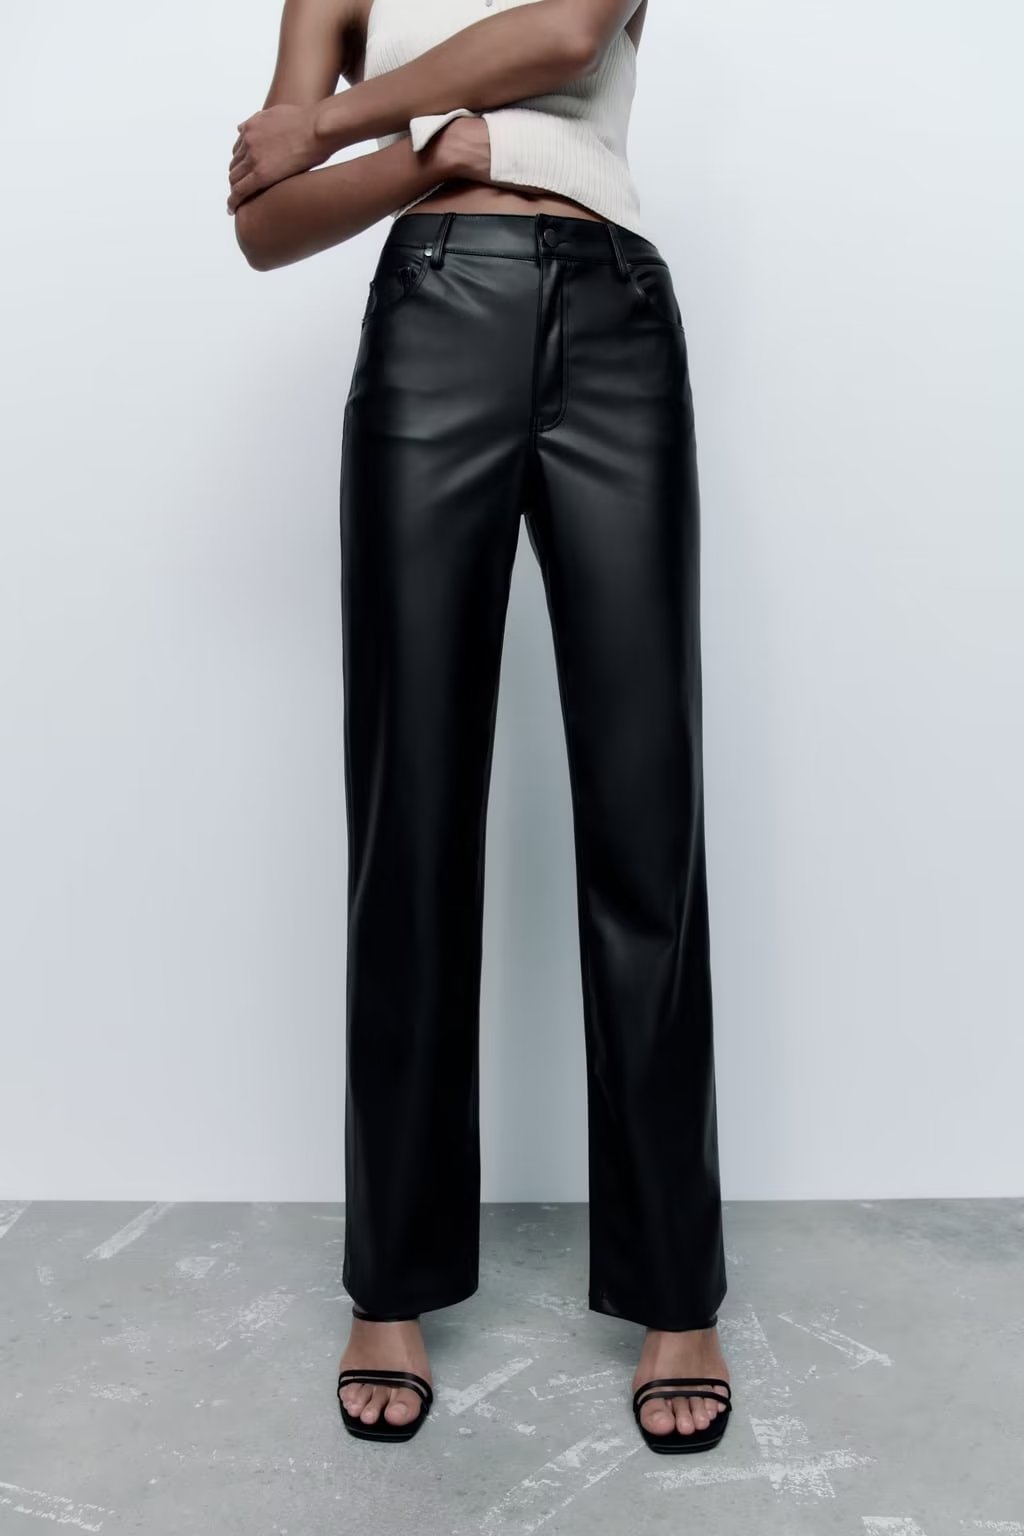 Early Autumn Women Clothing High Waist Solid Color Anti Faux Leather Casual Wide Leg Pants Trousers